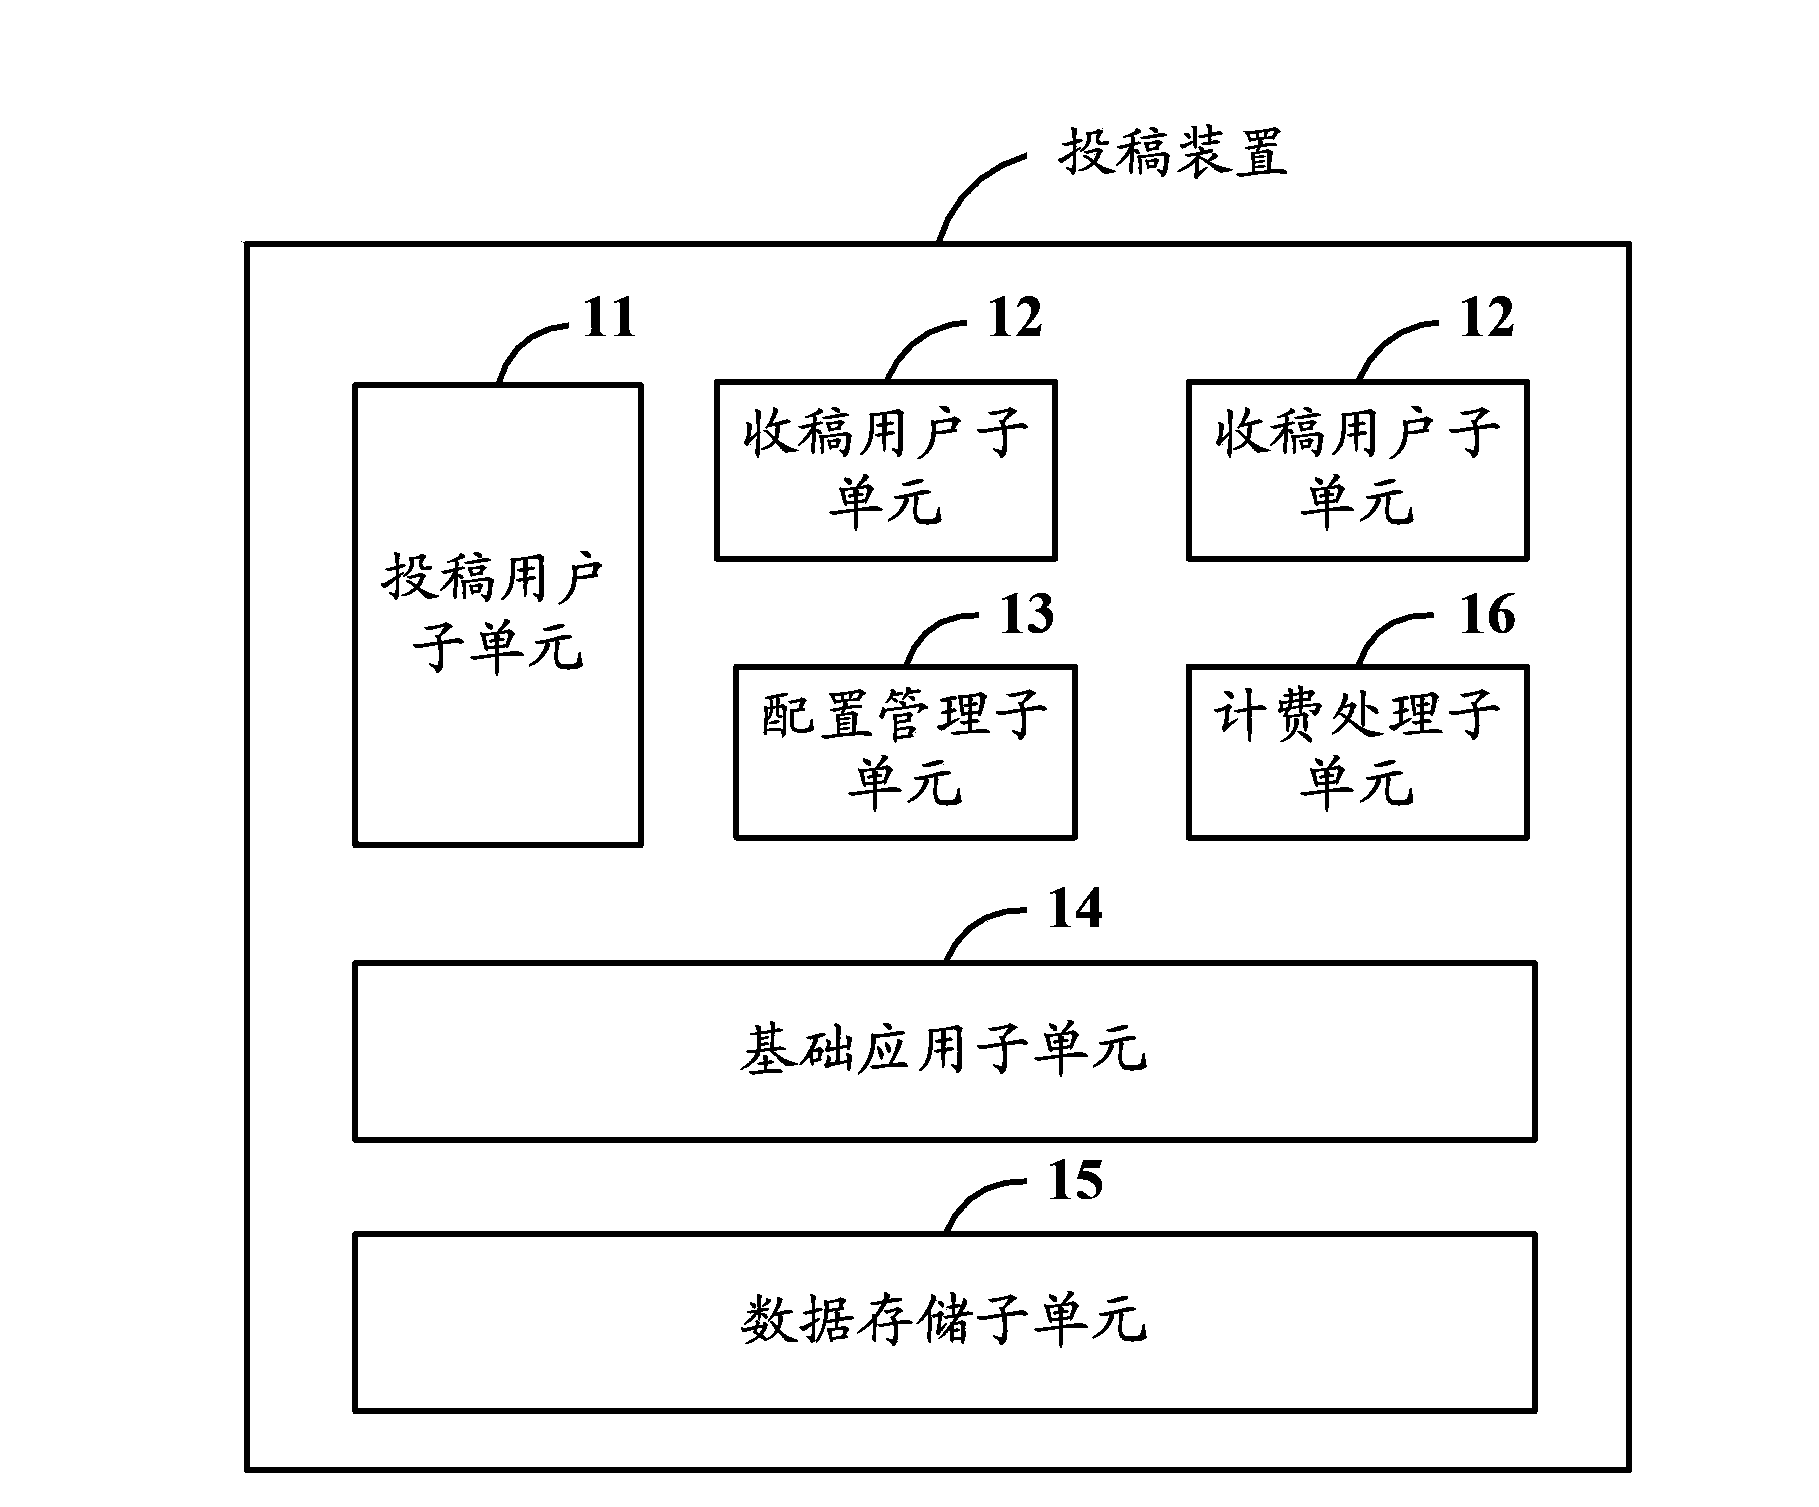 Submission device and submission method based on Internet cloud service